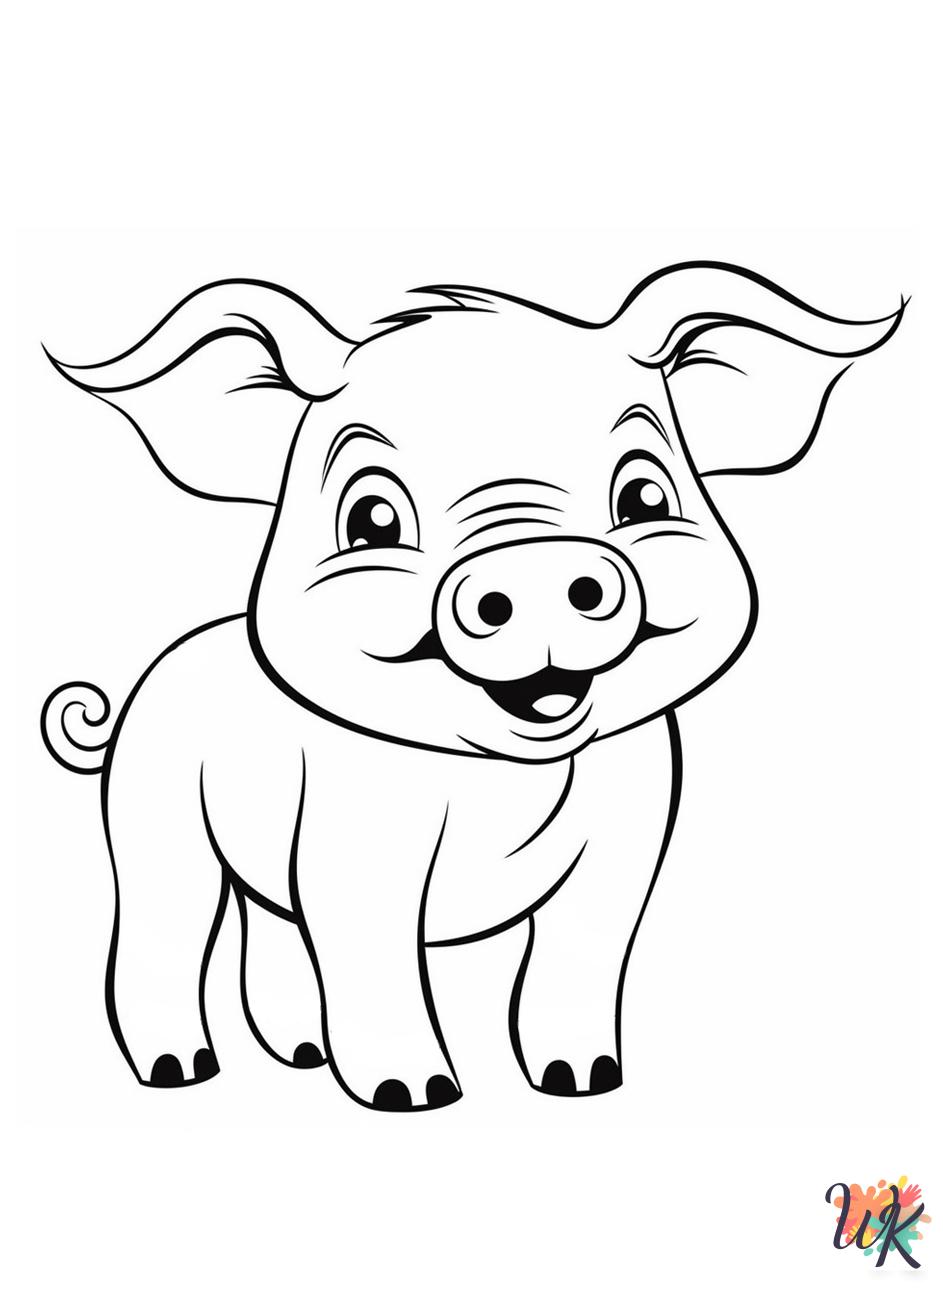 Pigs coloring pages printable free